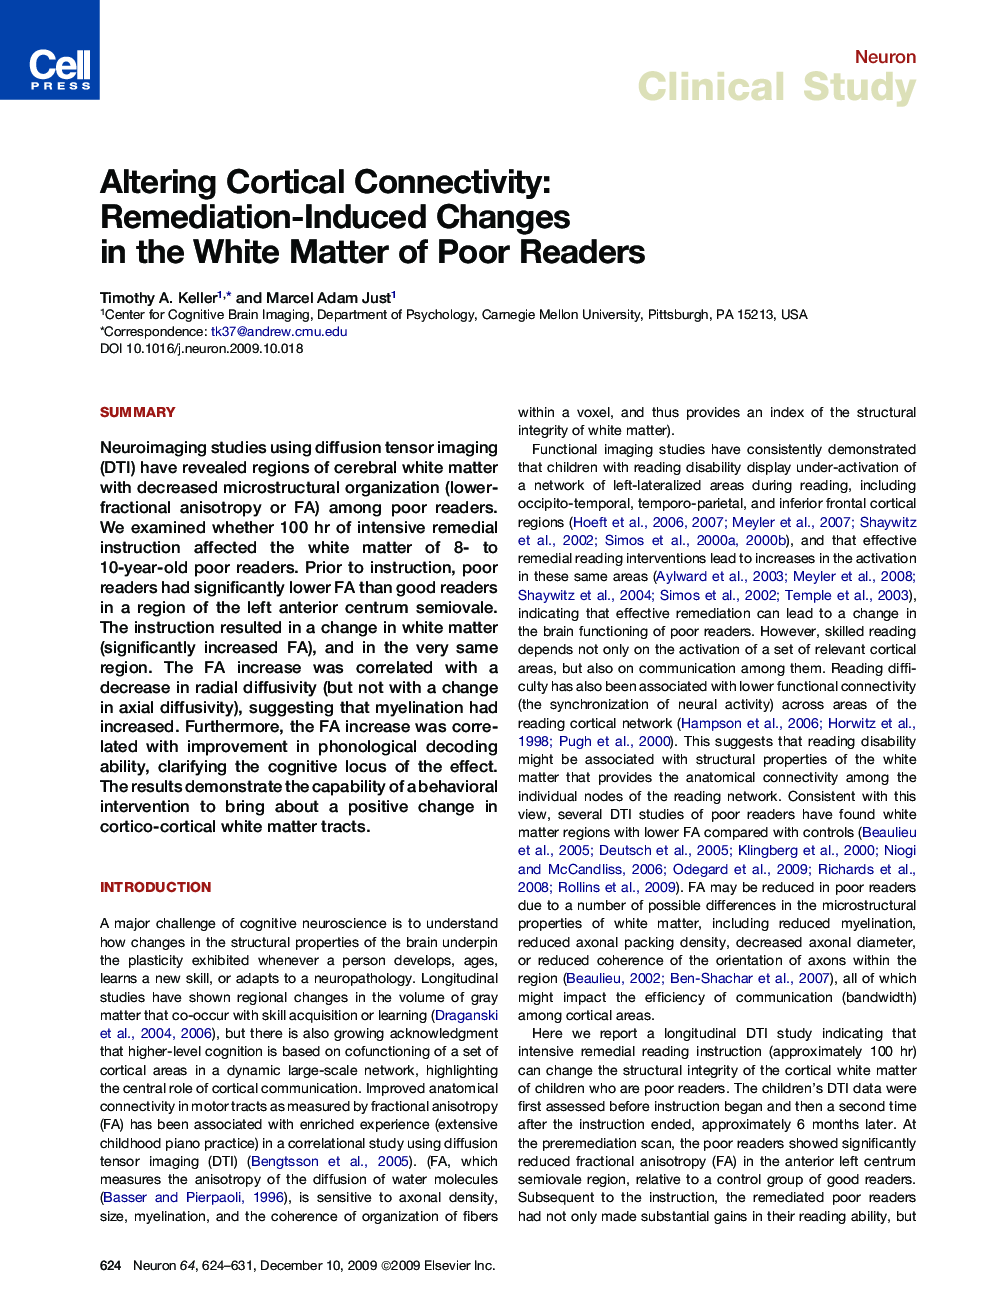 Altering Cortical Connectivity: Remediation-Induced Changes in the White Matter of Poor Readers